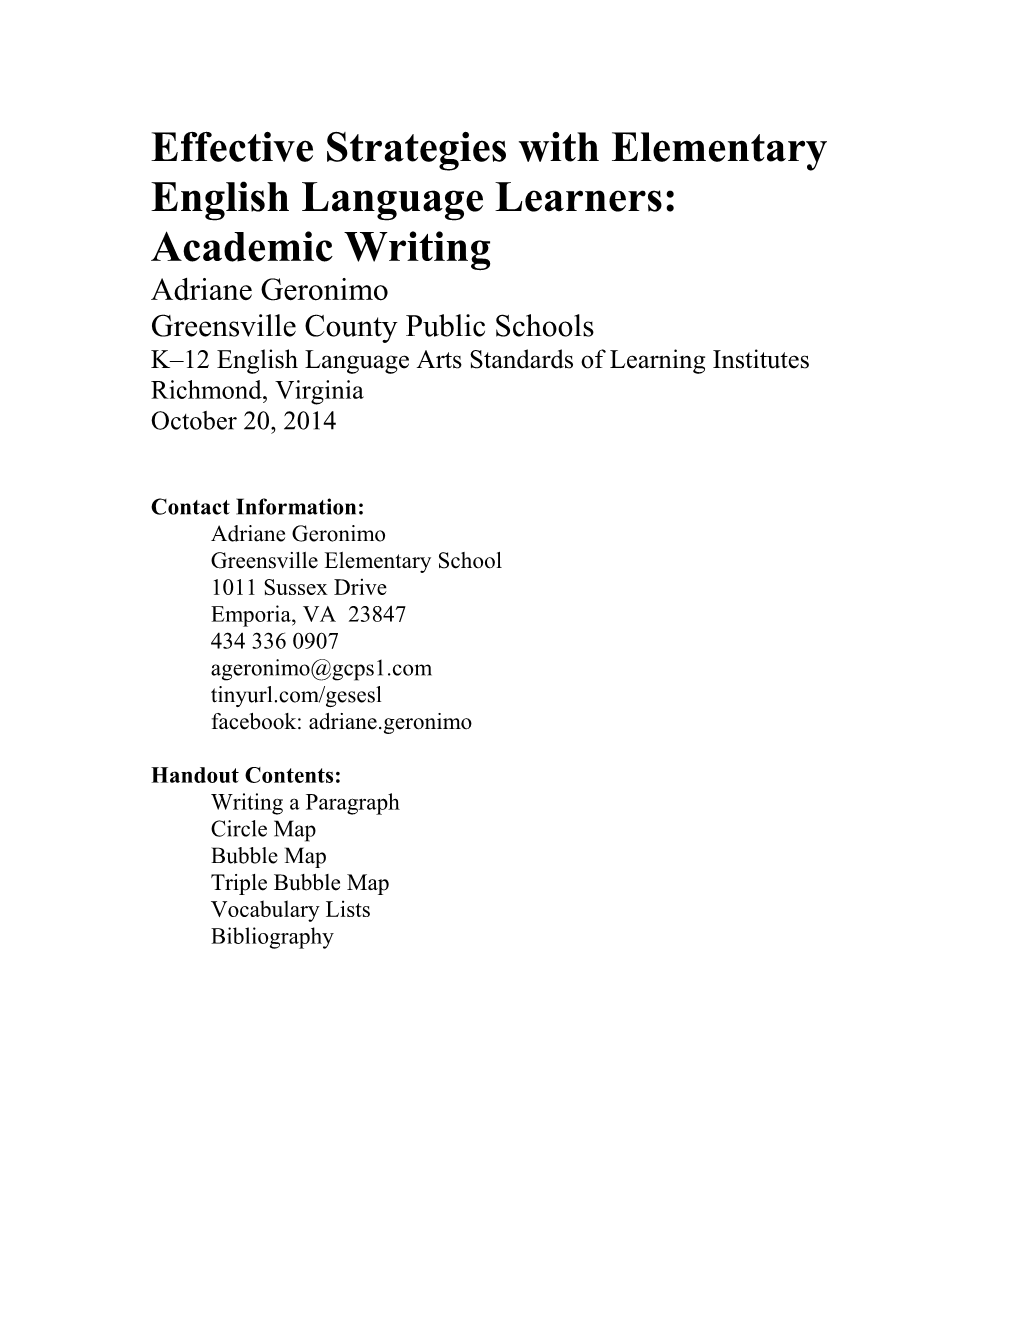 Effective Strategies with Elementary English Language Learners